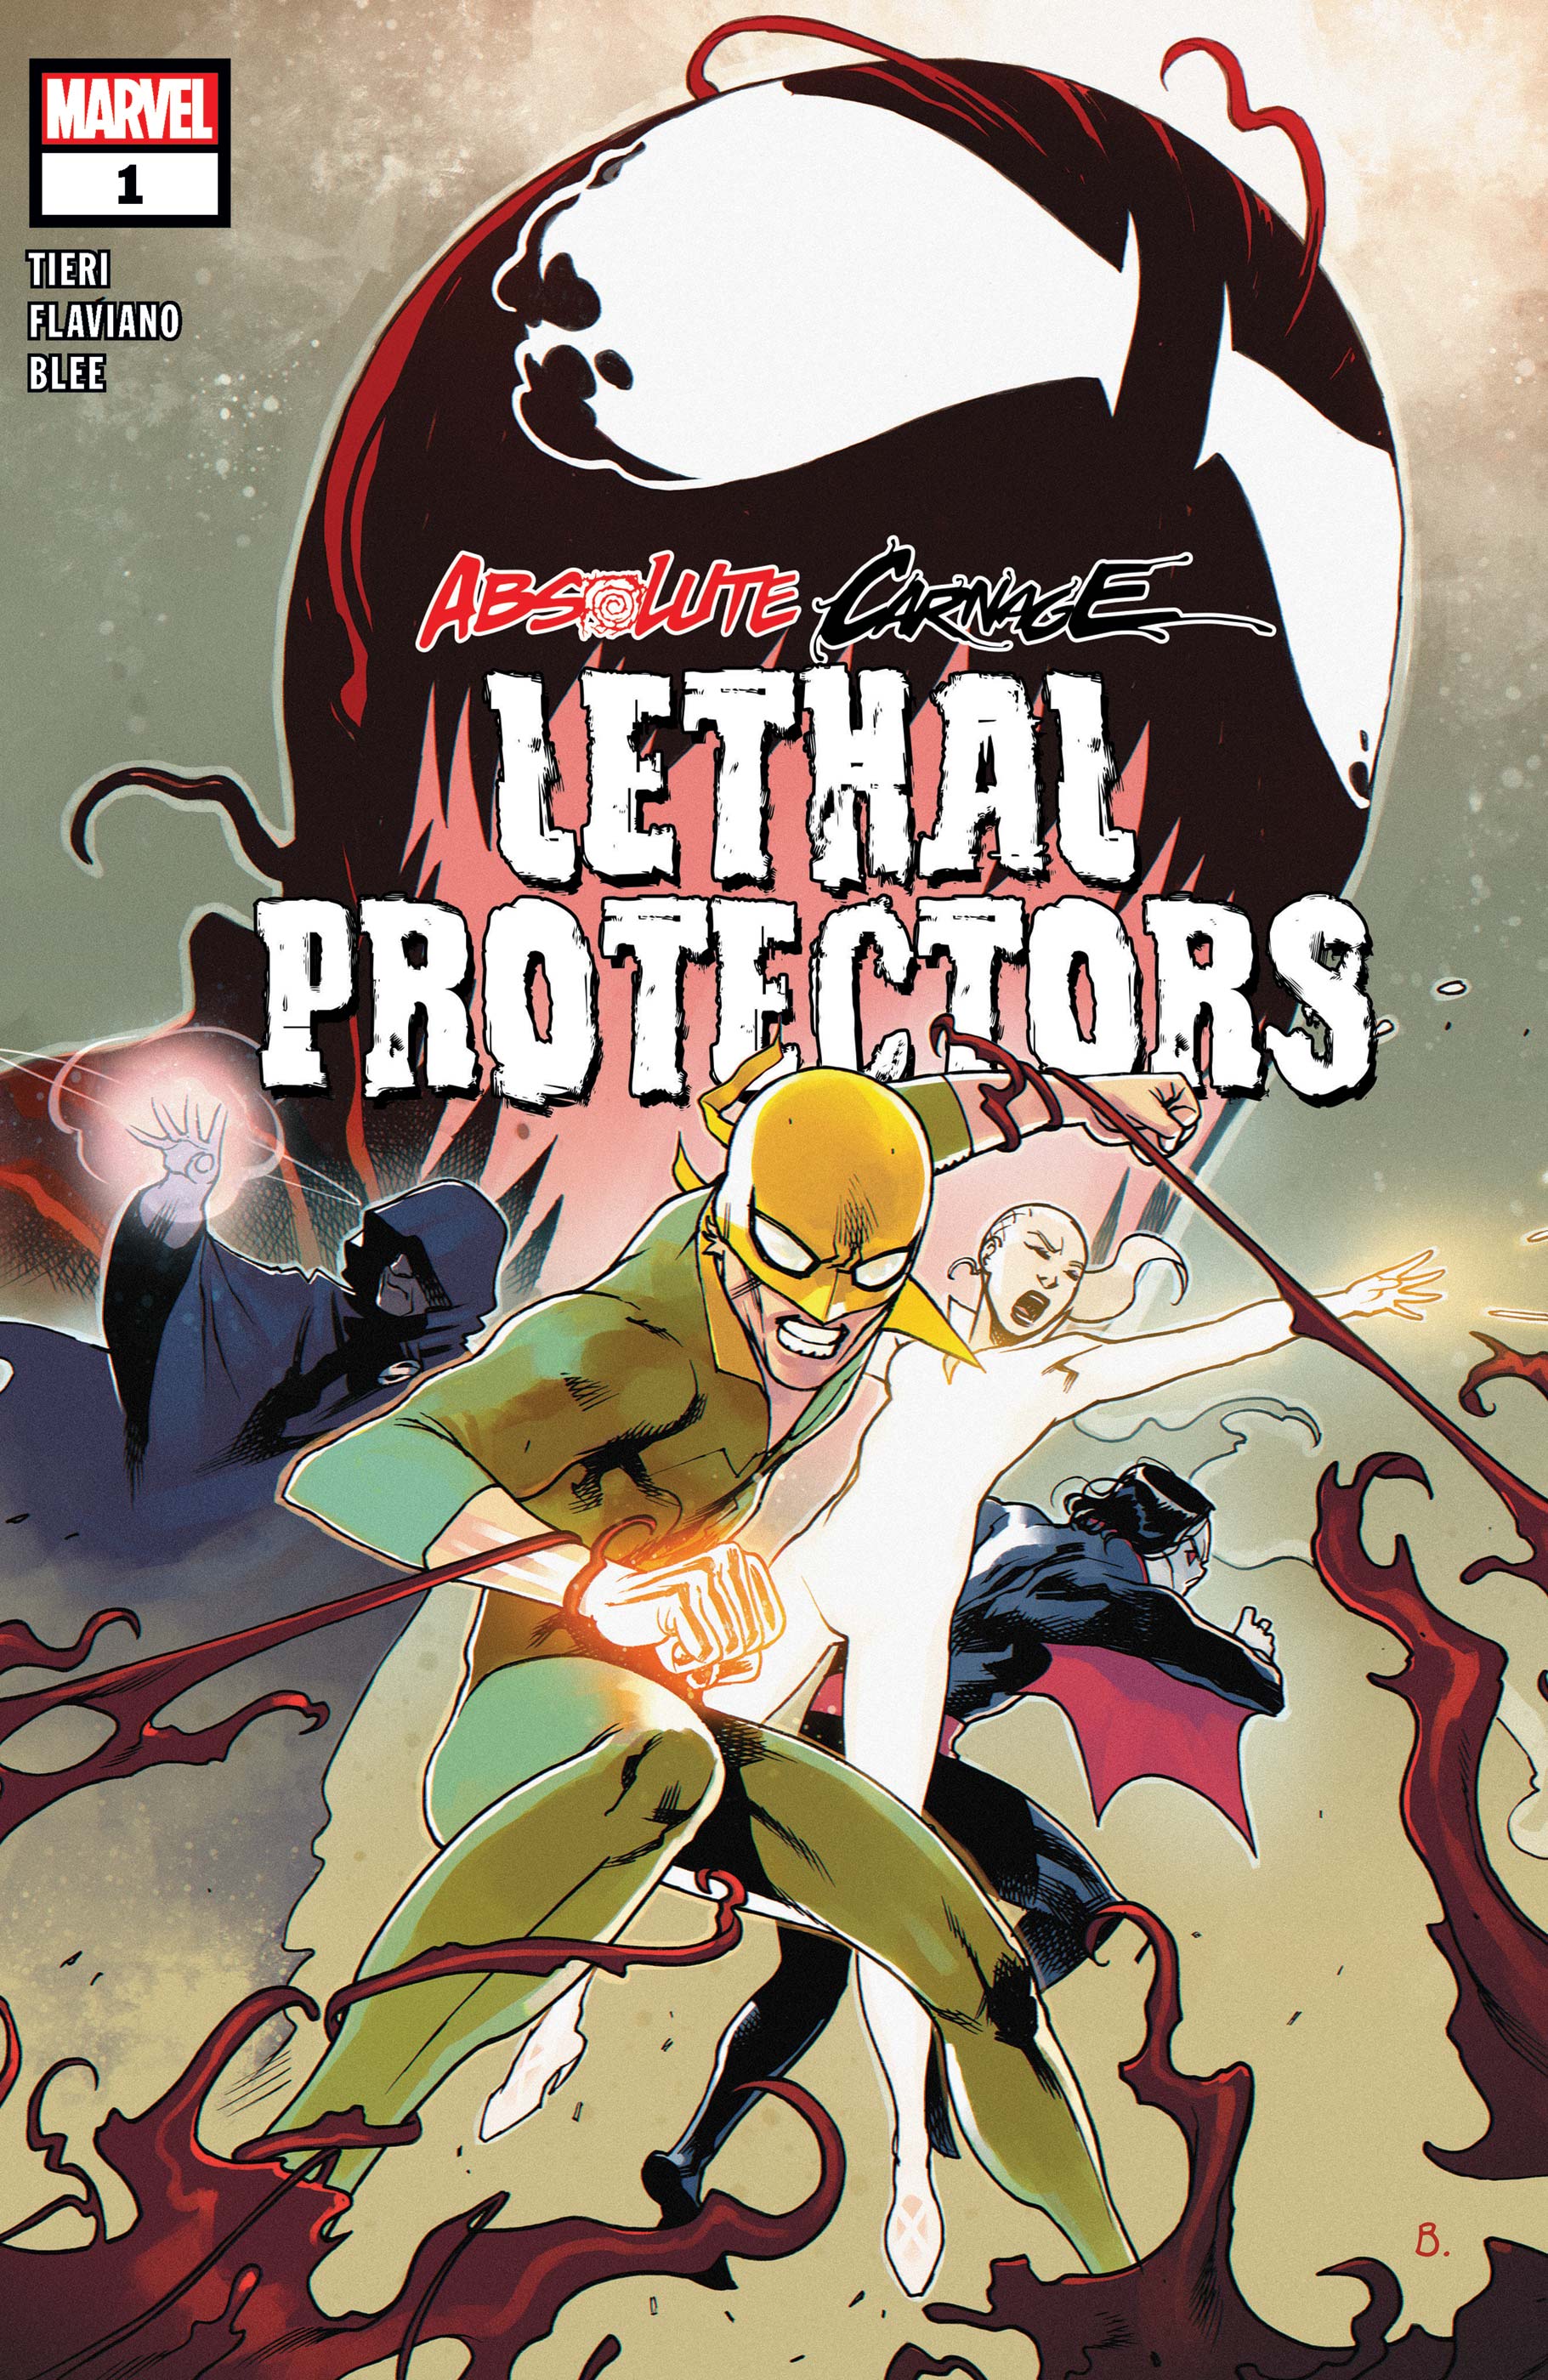 Absolute Carnage: Lethal Protectors (2019) #1